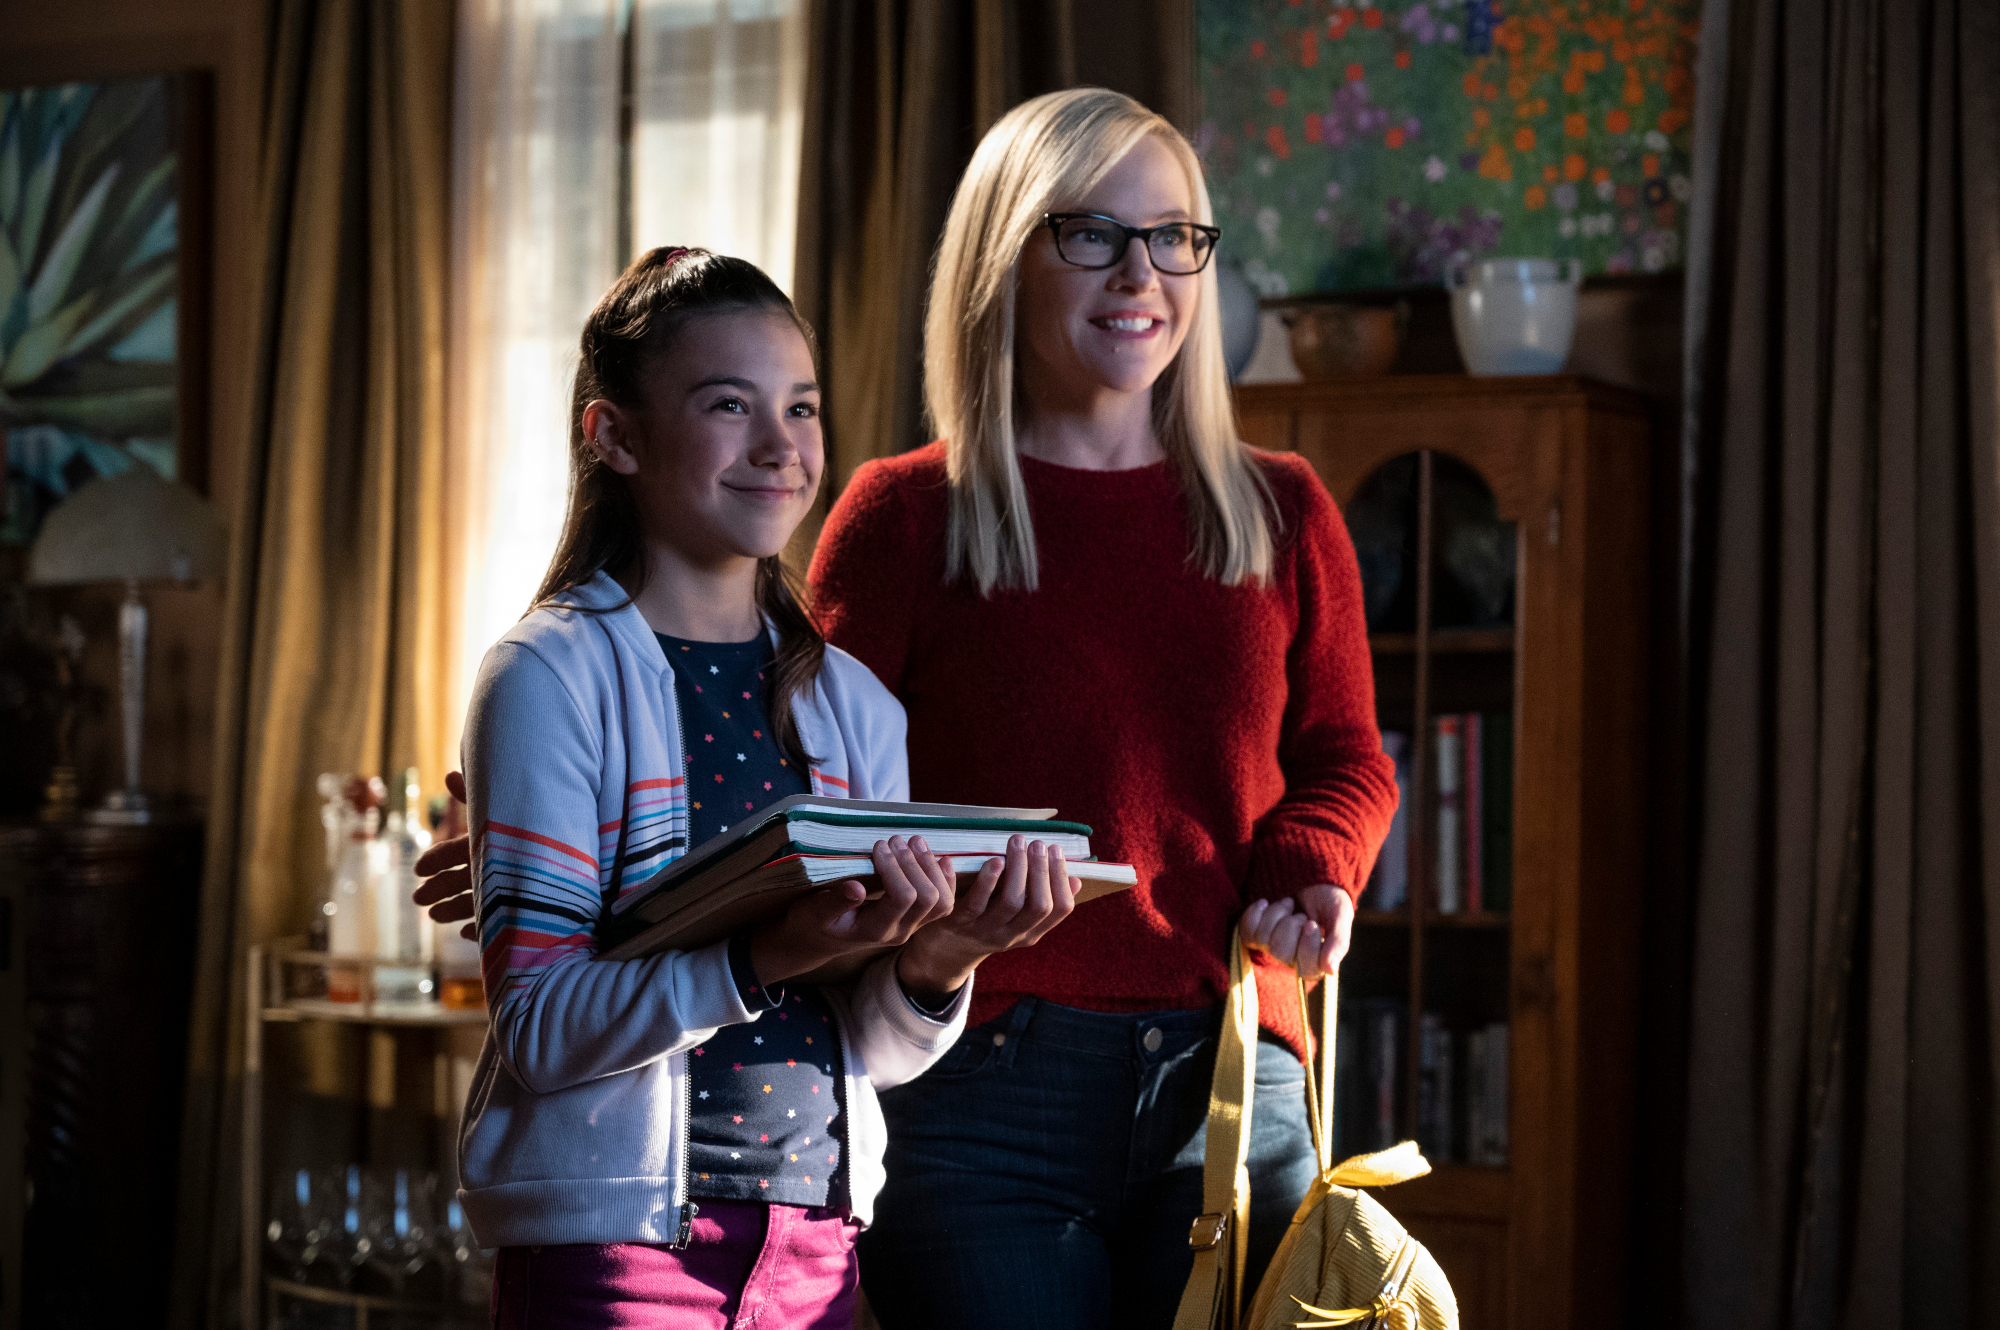 Scarlett Estevez and Rachael Harris as Trixie and Linda in 'Lucifer' Season 5, which built to the characters' endings in season 6. Trixie is holding a stack of books, and Linda is standing next to her in a red sweater.